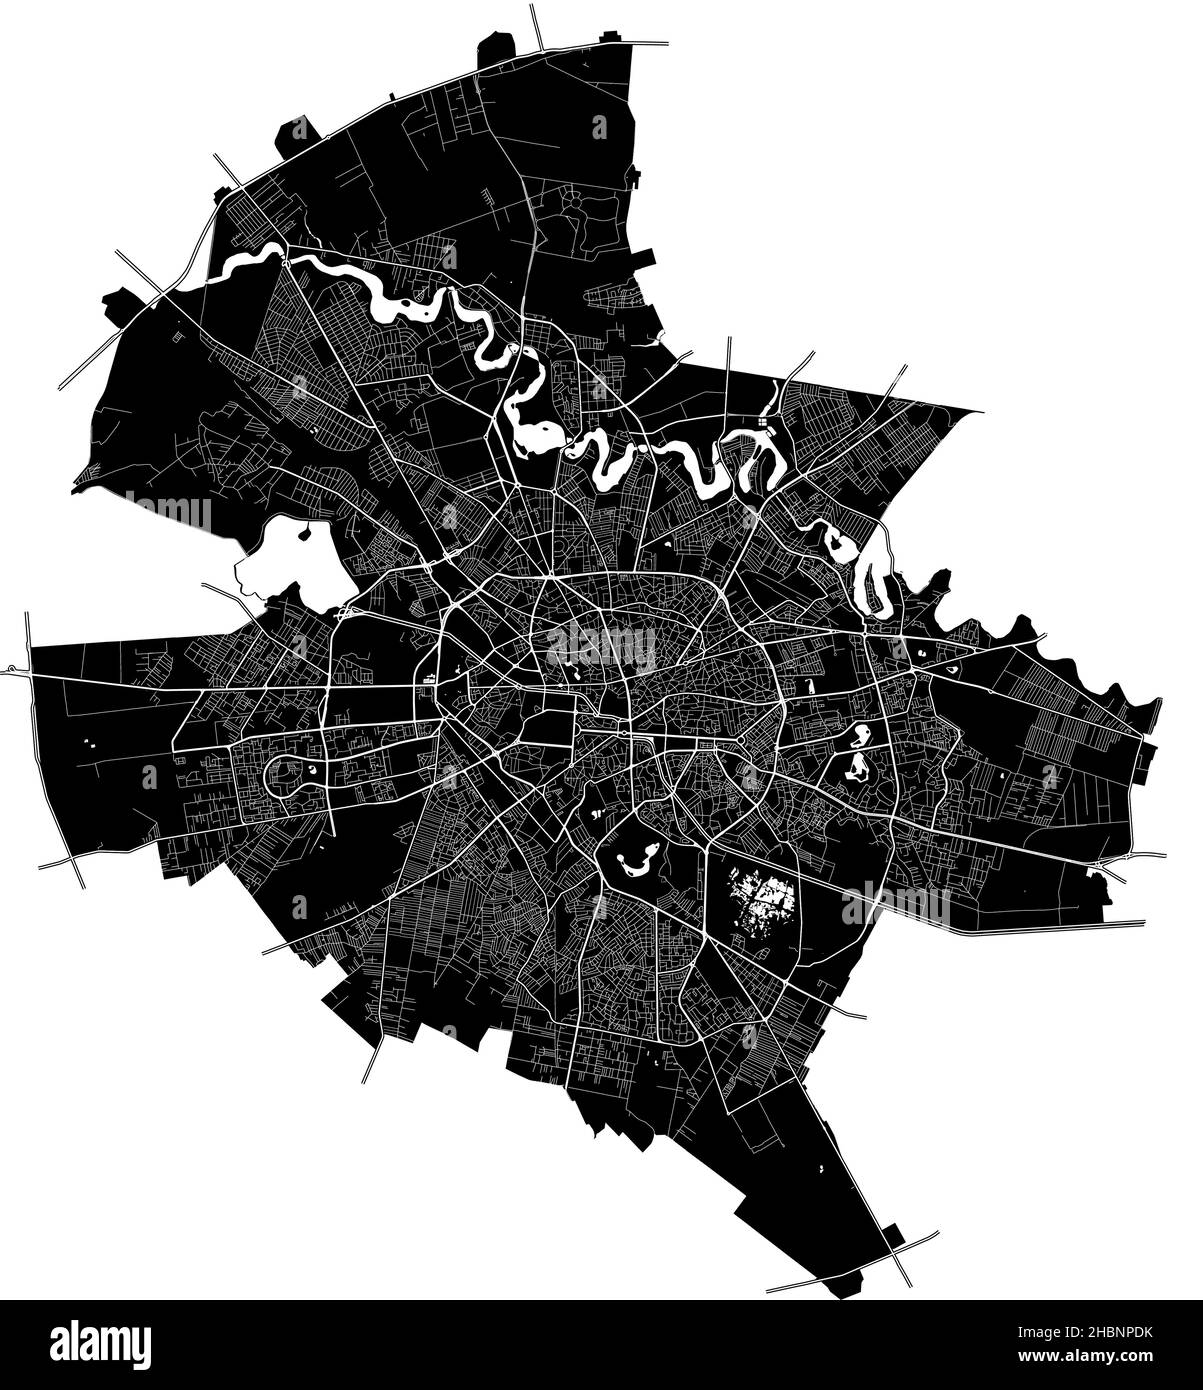 Bucharest, Romania, high resolution vector map with city boundaries, and editable paths. The city map was drawn with white areas and lines for main ro Stock Vector